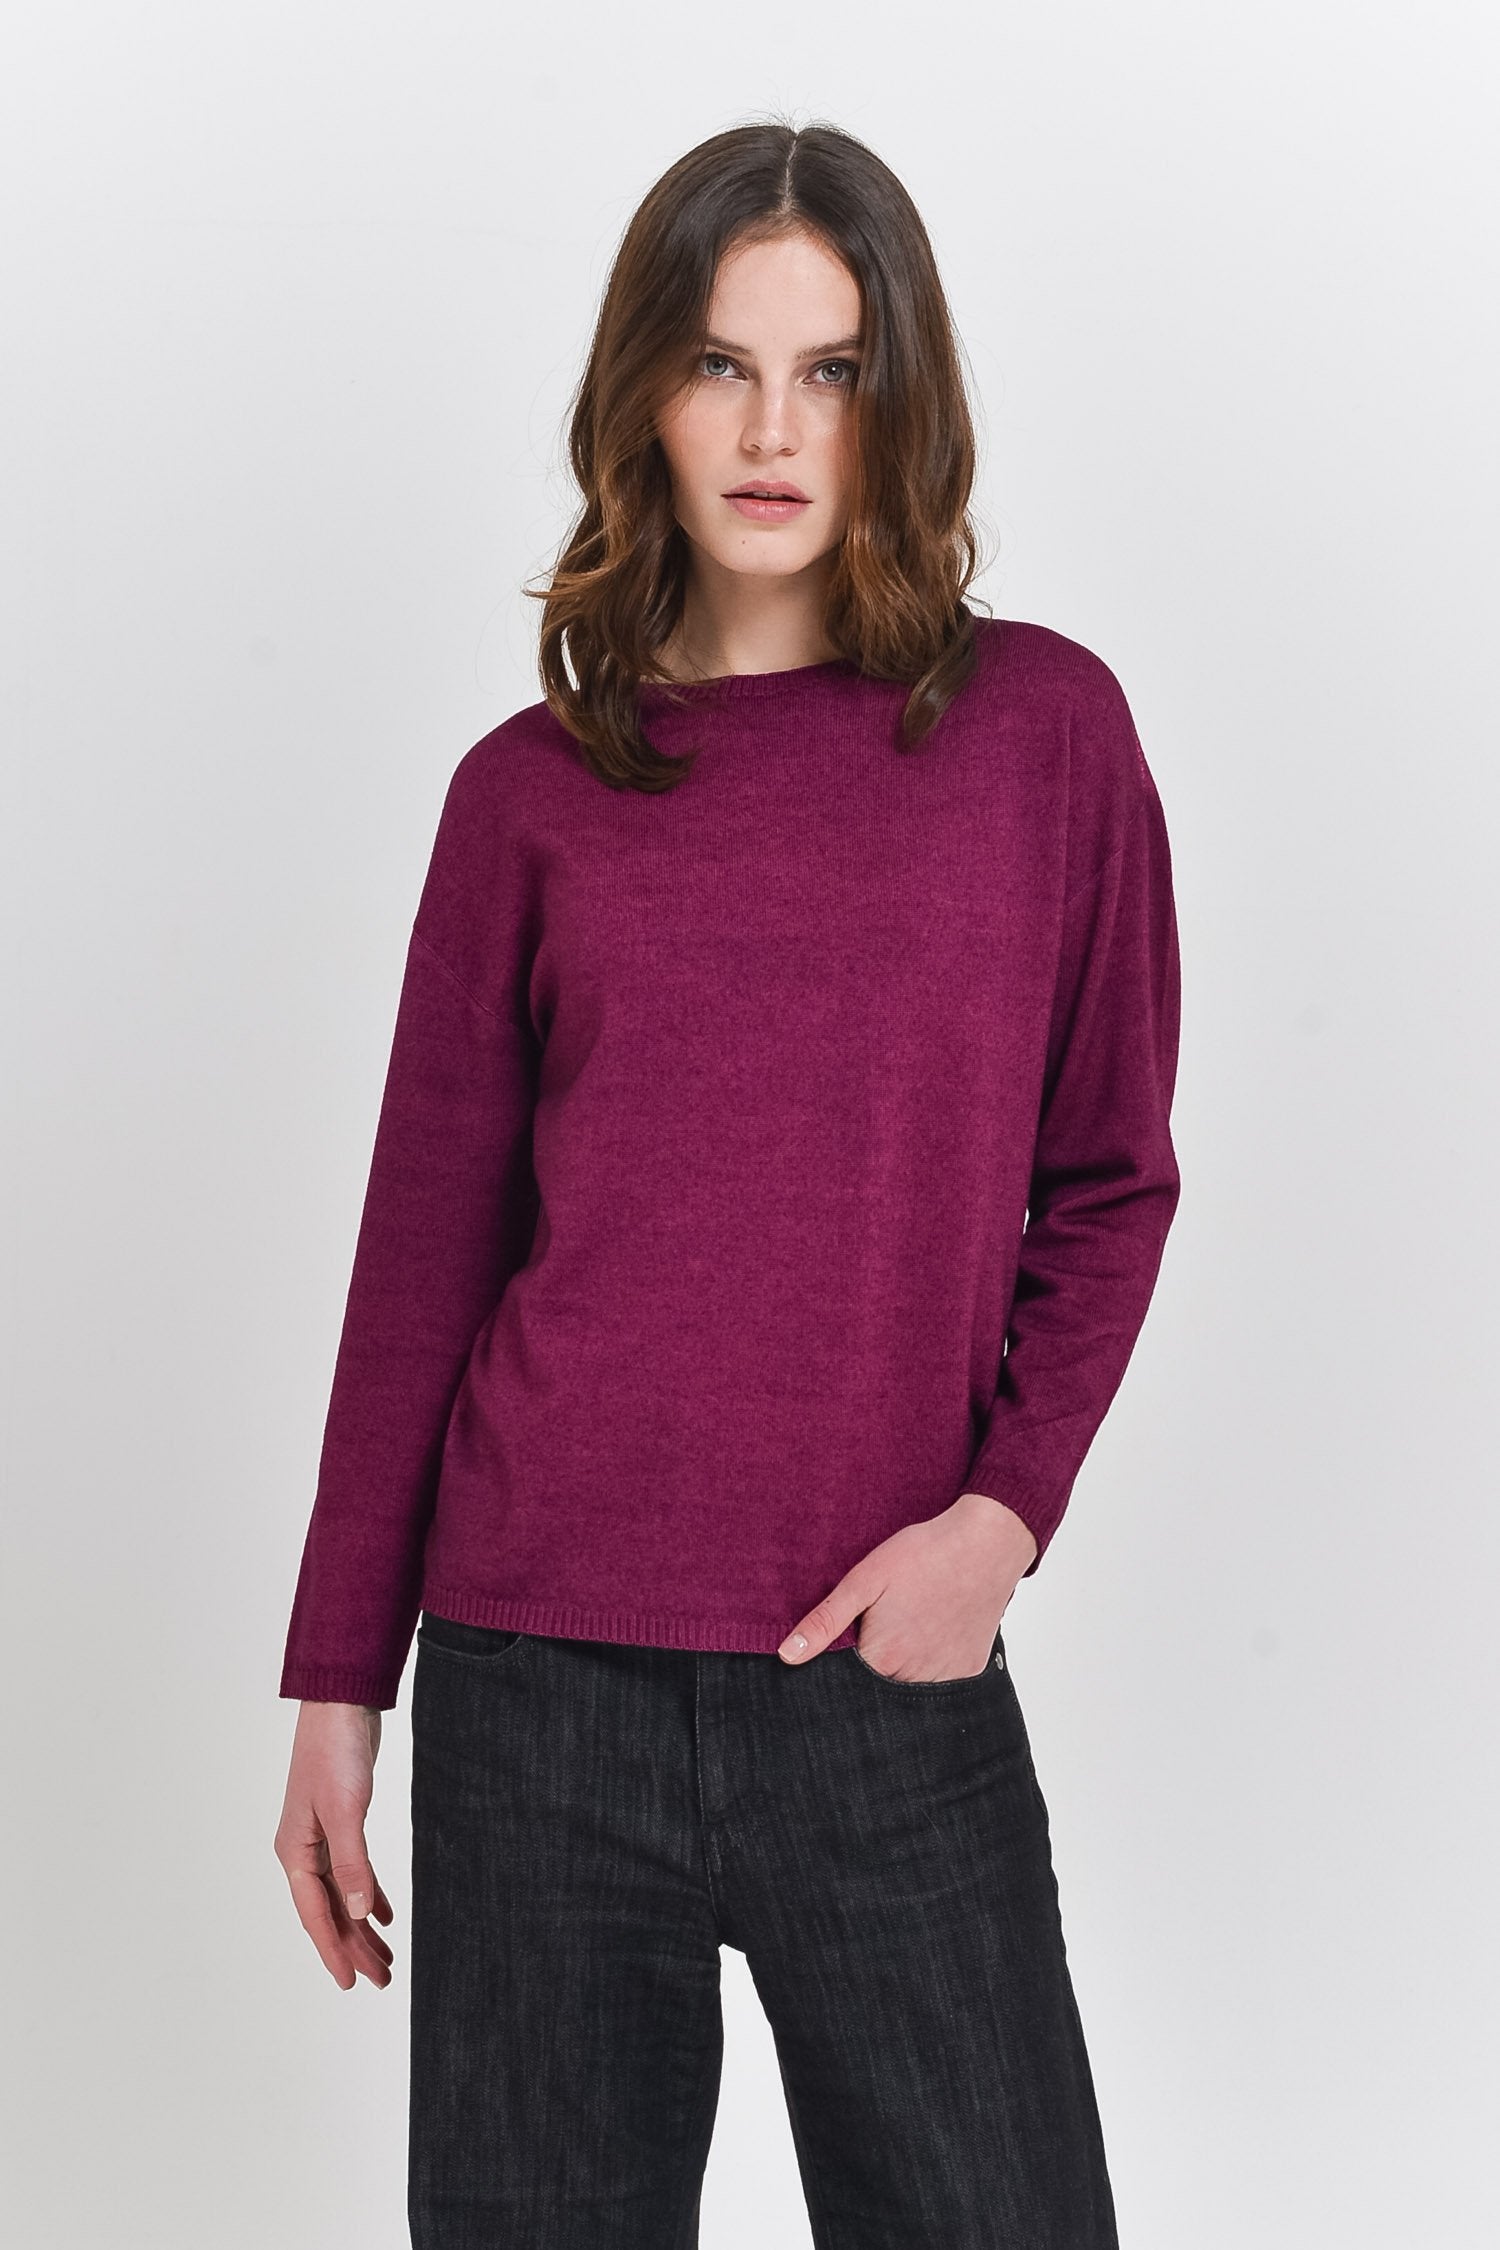 Reay Jam - Comfy Sweater - Sweaters